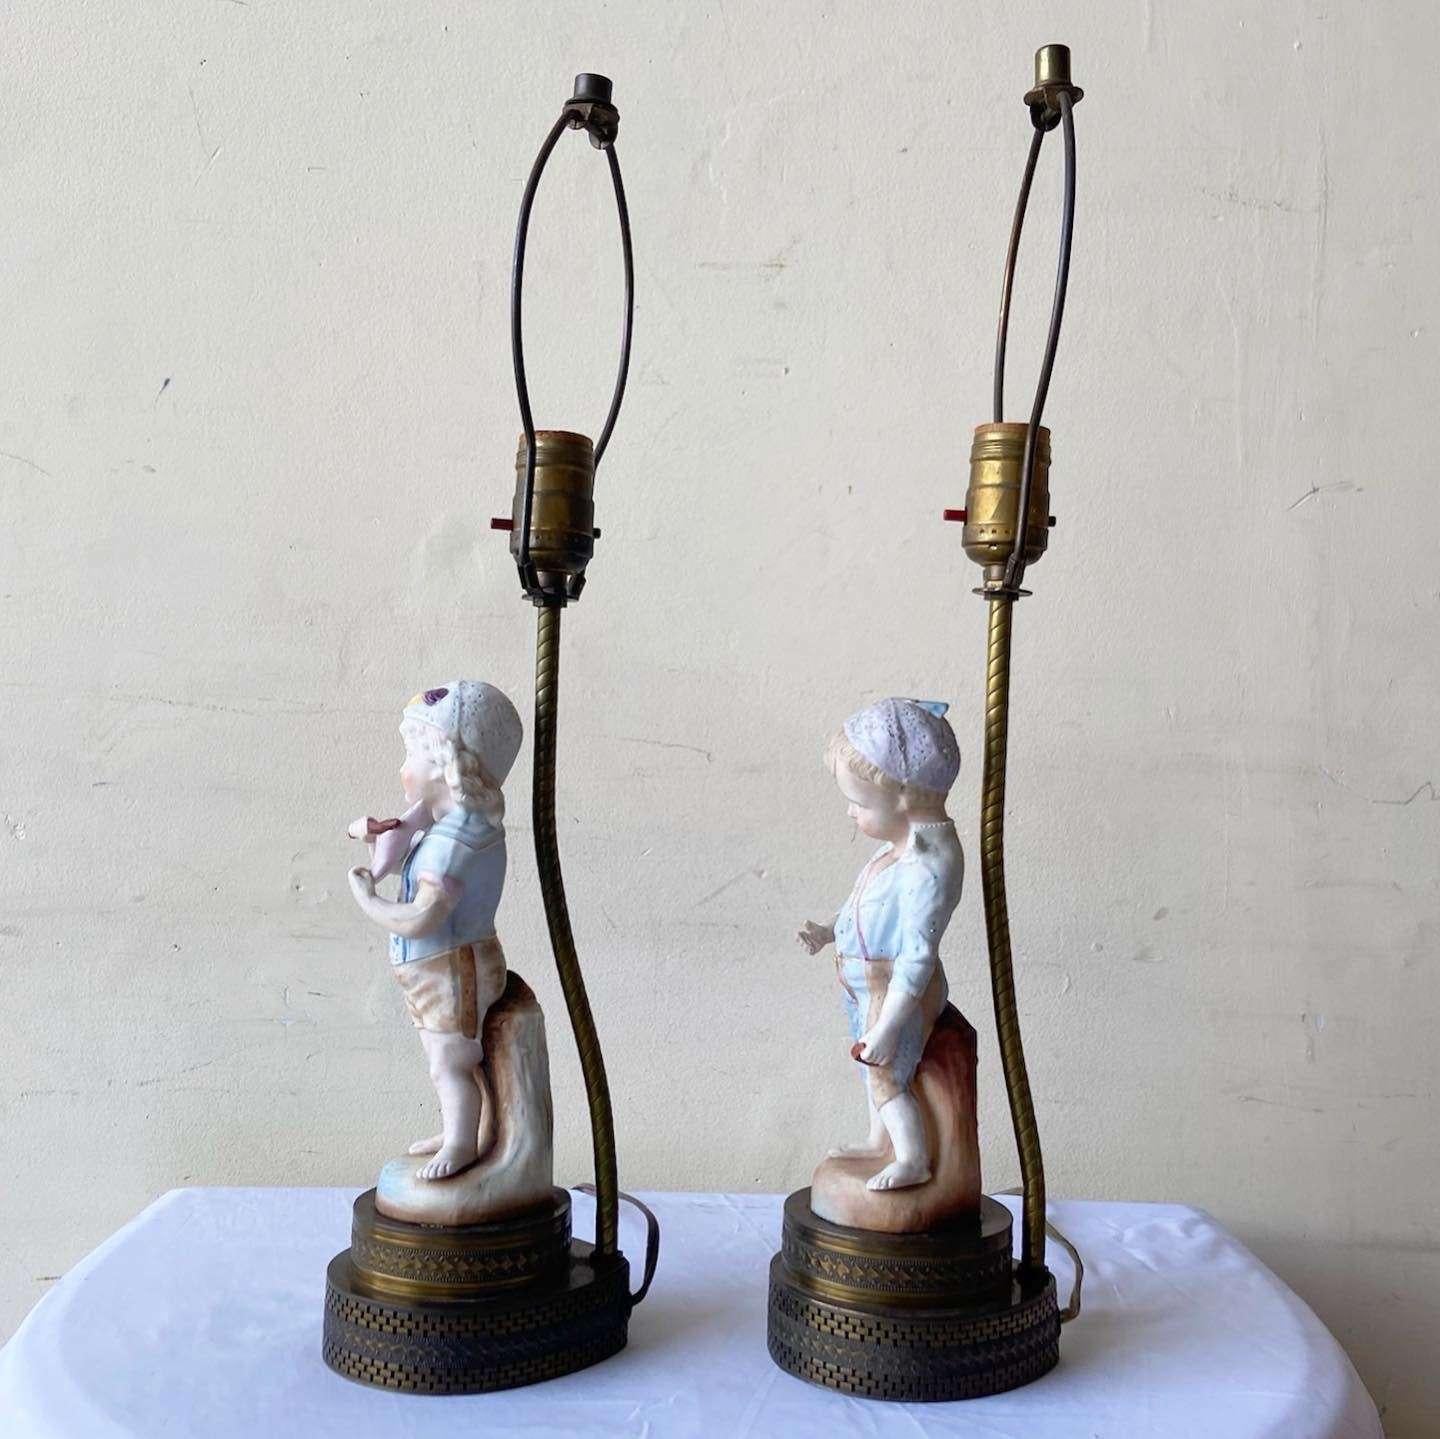 Vintage Boy and Girl Figurine Table Lamps In Good Condition For Sale In Delray Beach, FL